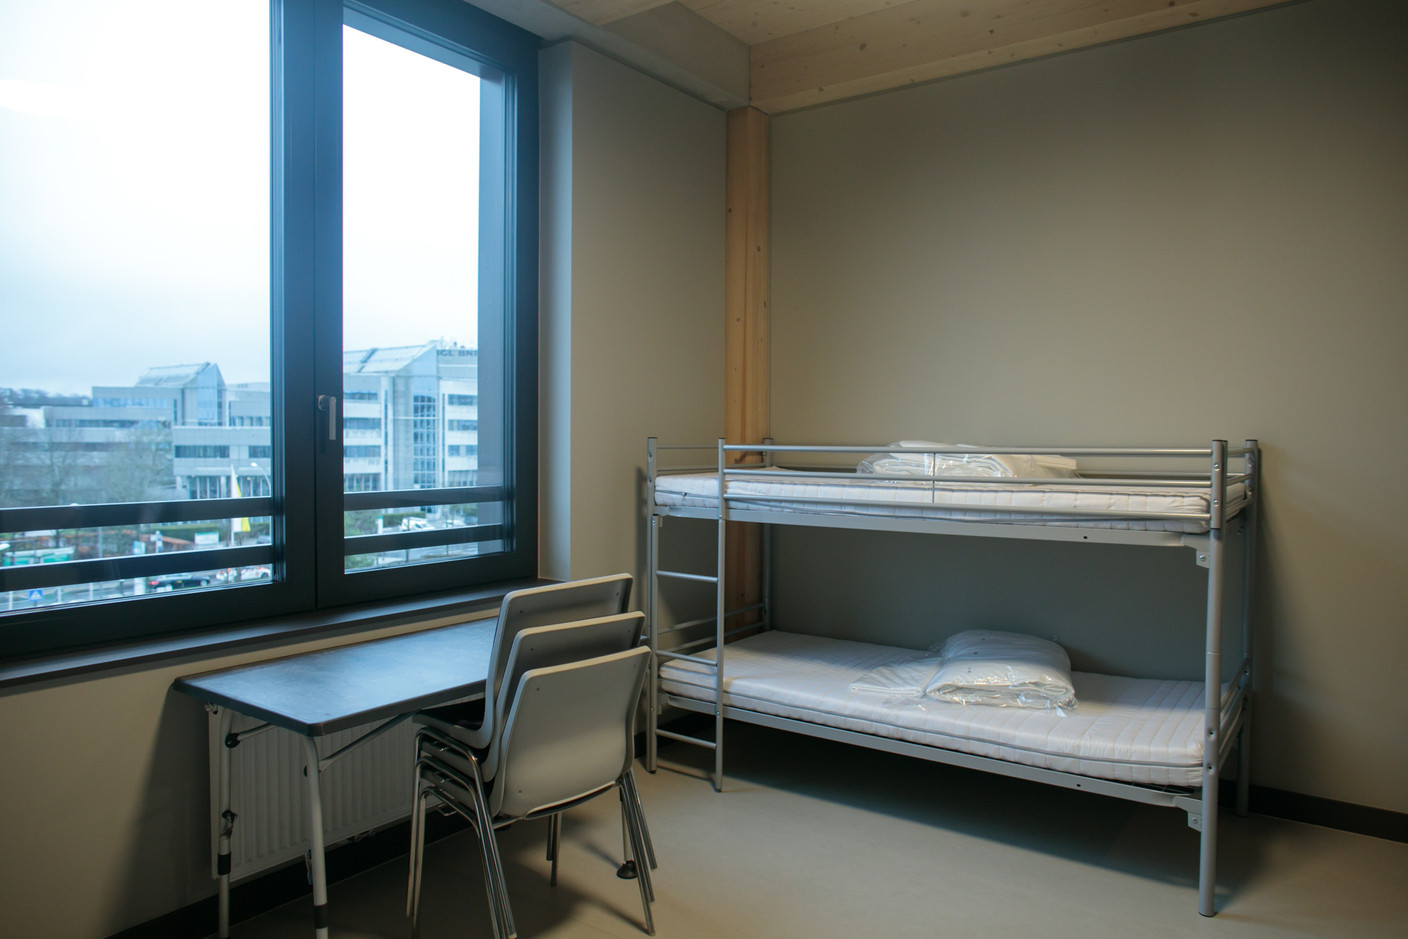 An asylum seeker centre in Luxembourg where 2,269 people requested asylum last year in addition to refugees from Ukraine. Photo: Matic Zorman / Maison Moderne